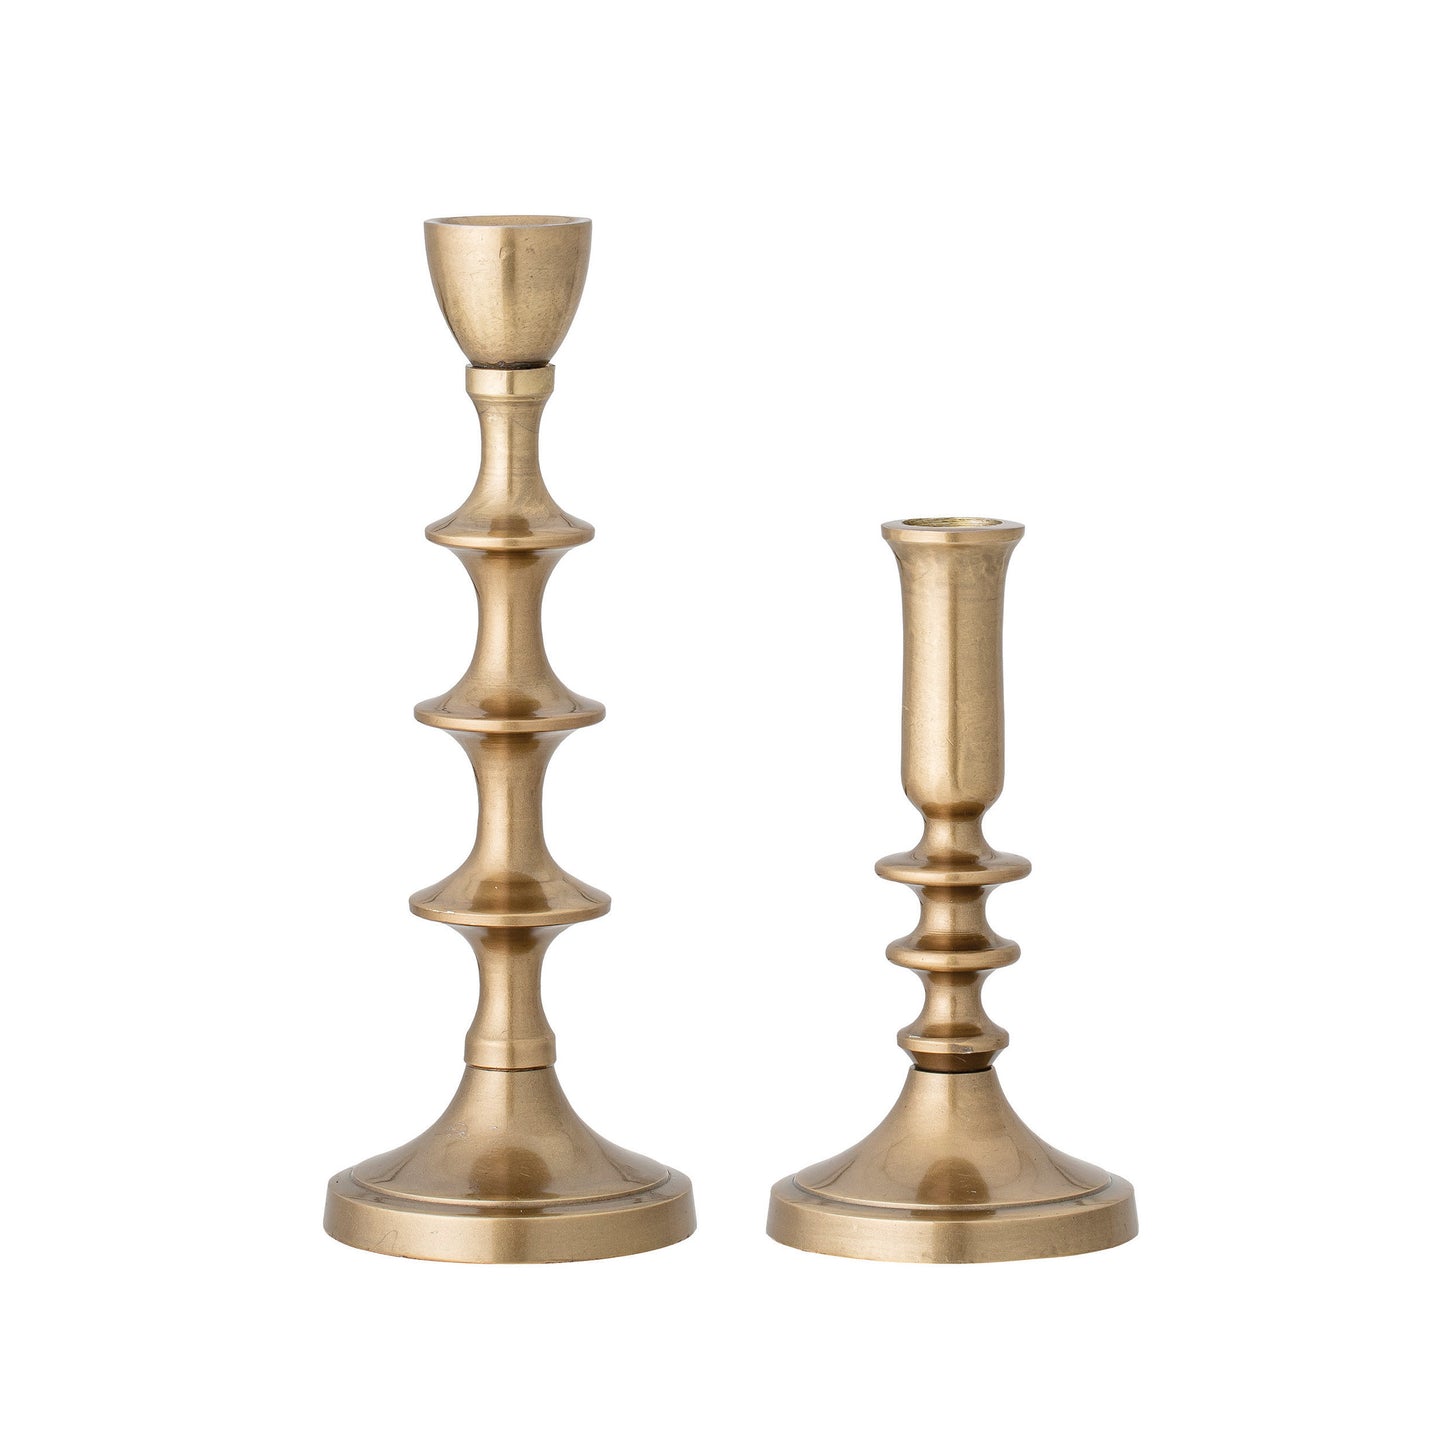 Set of 2 Antique Gold Taper Candle Holders